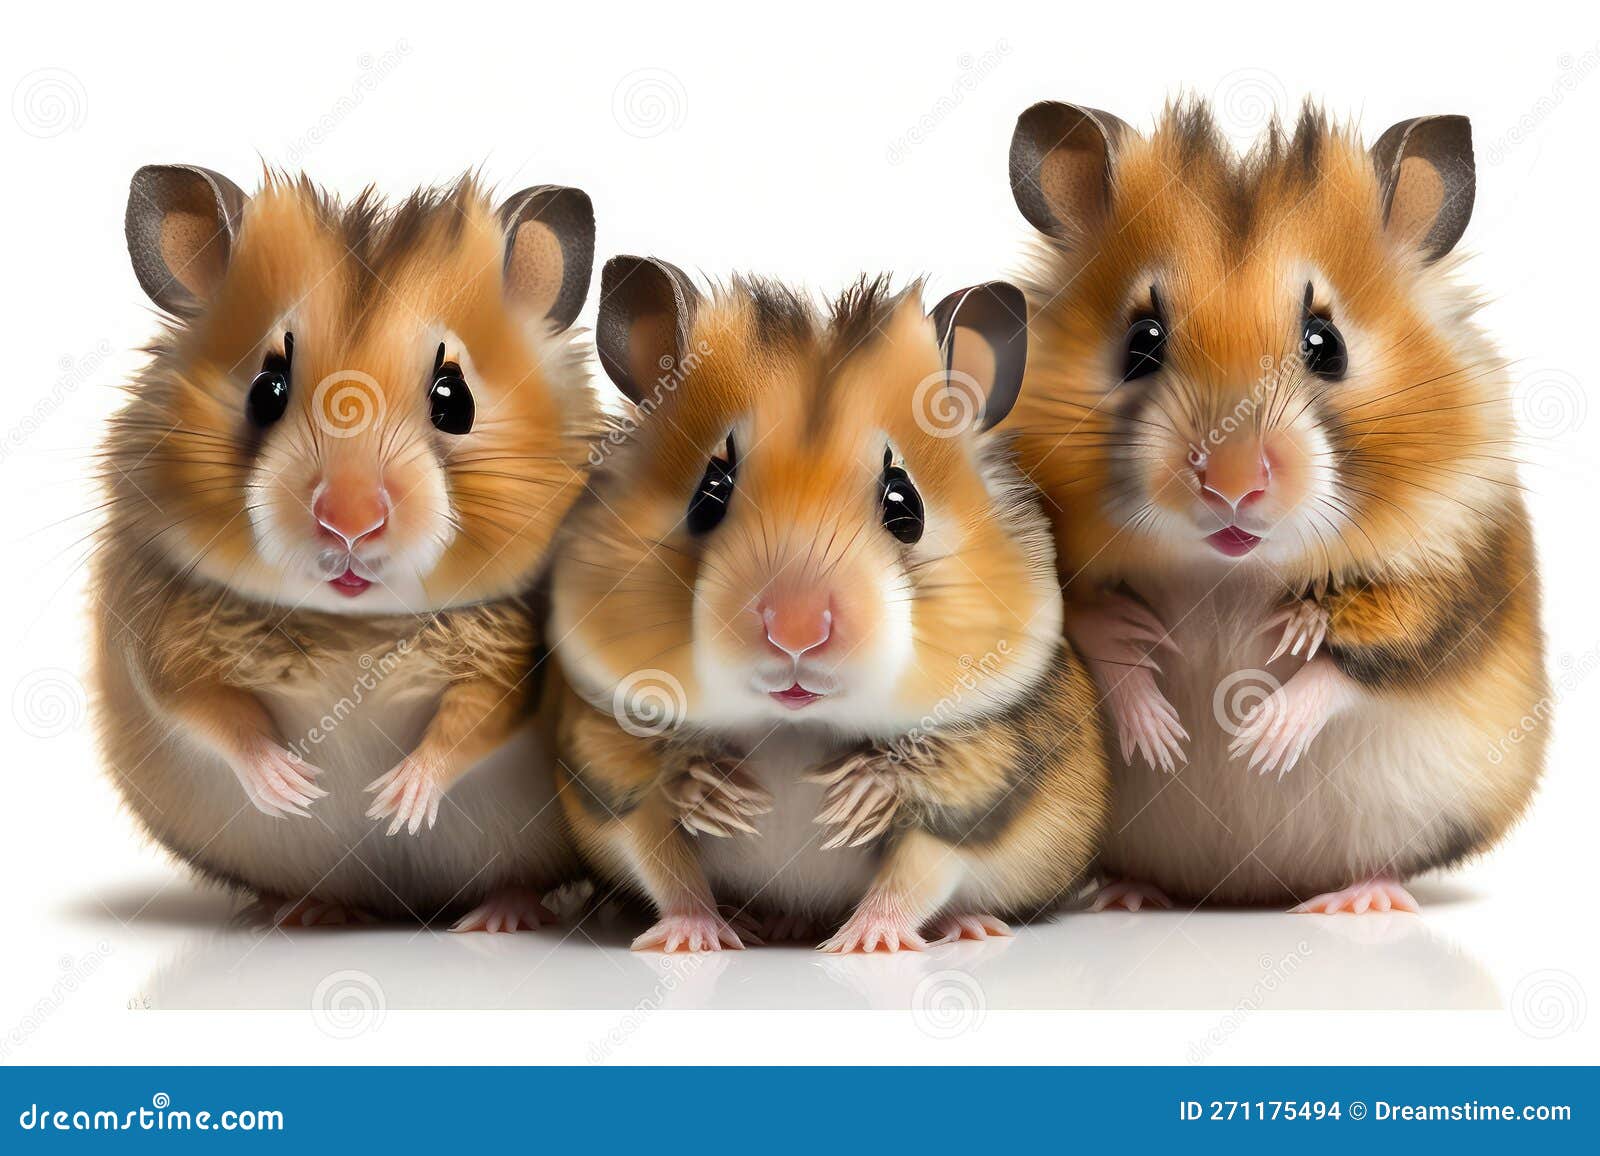 Are Hamsters Intelligent?